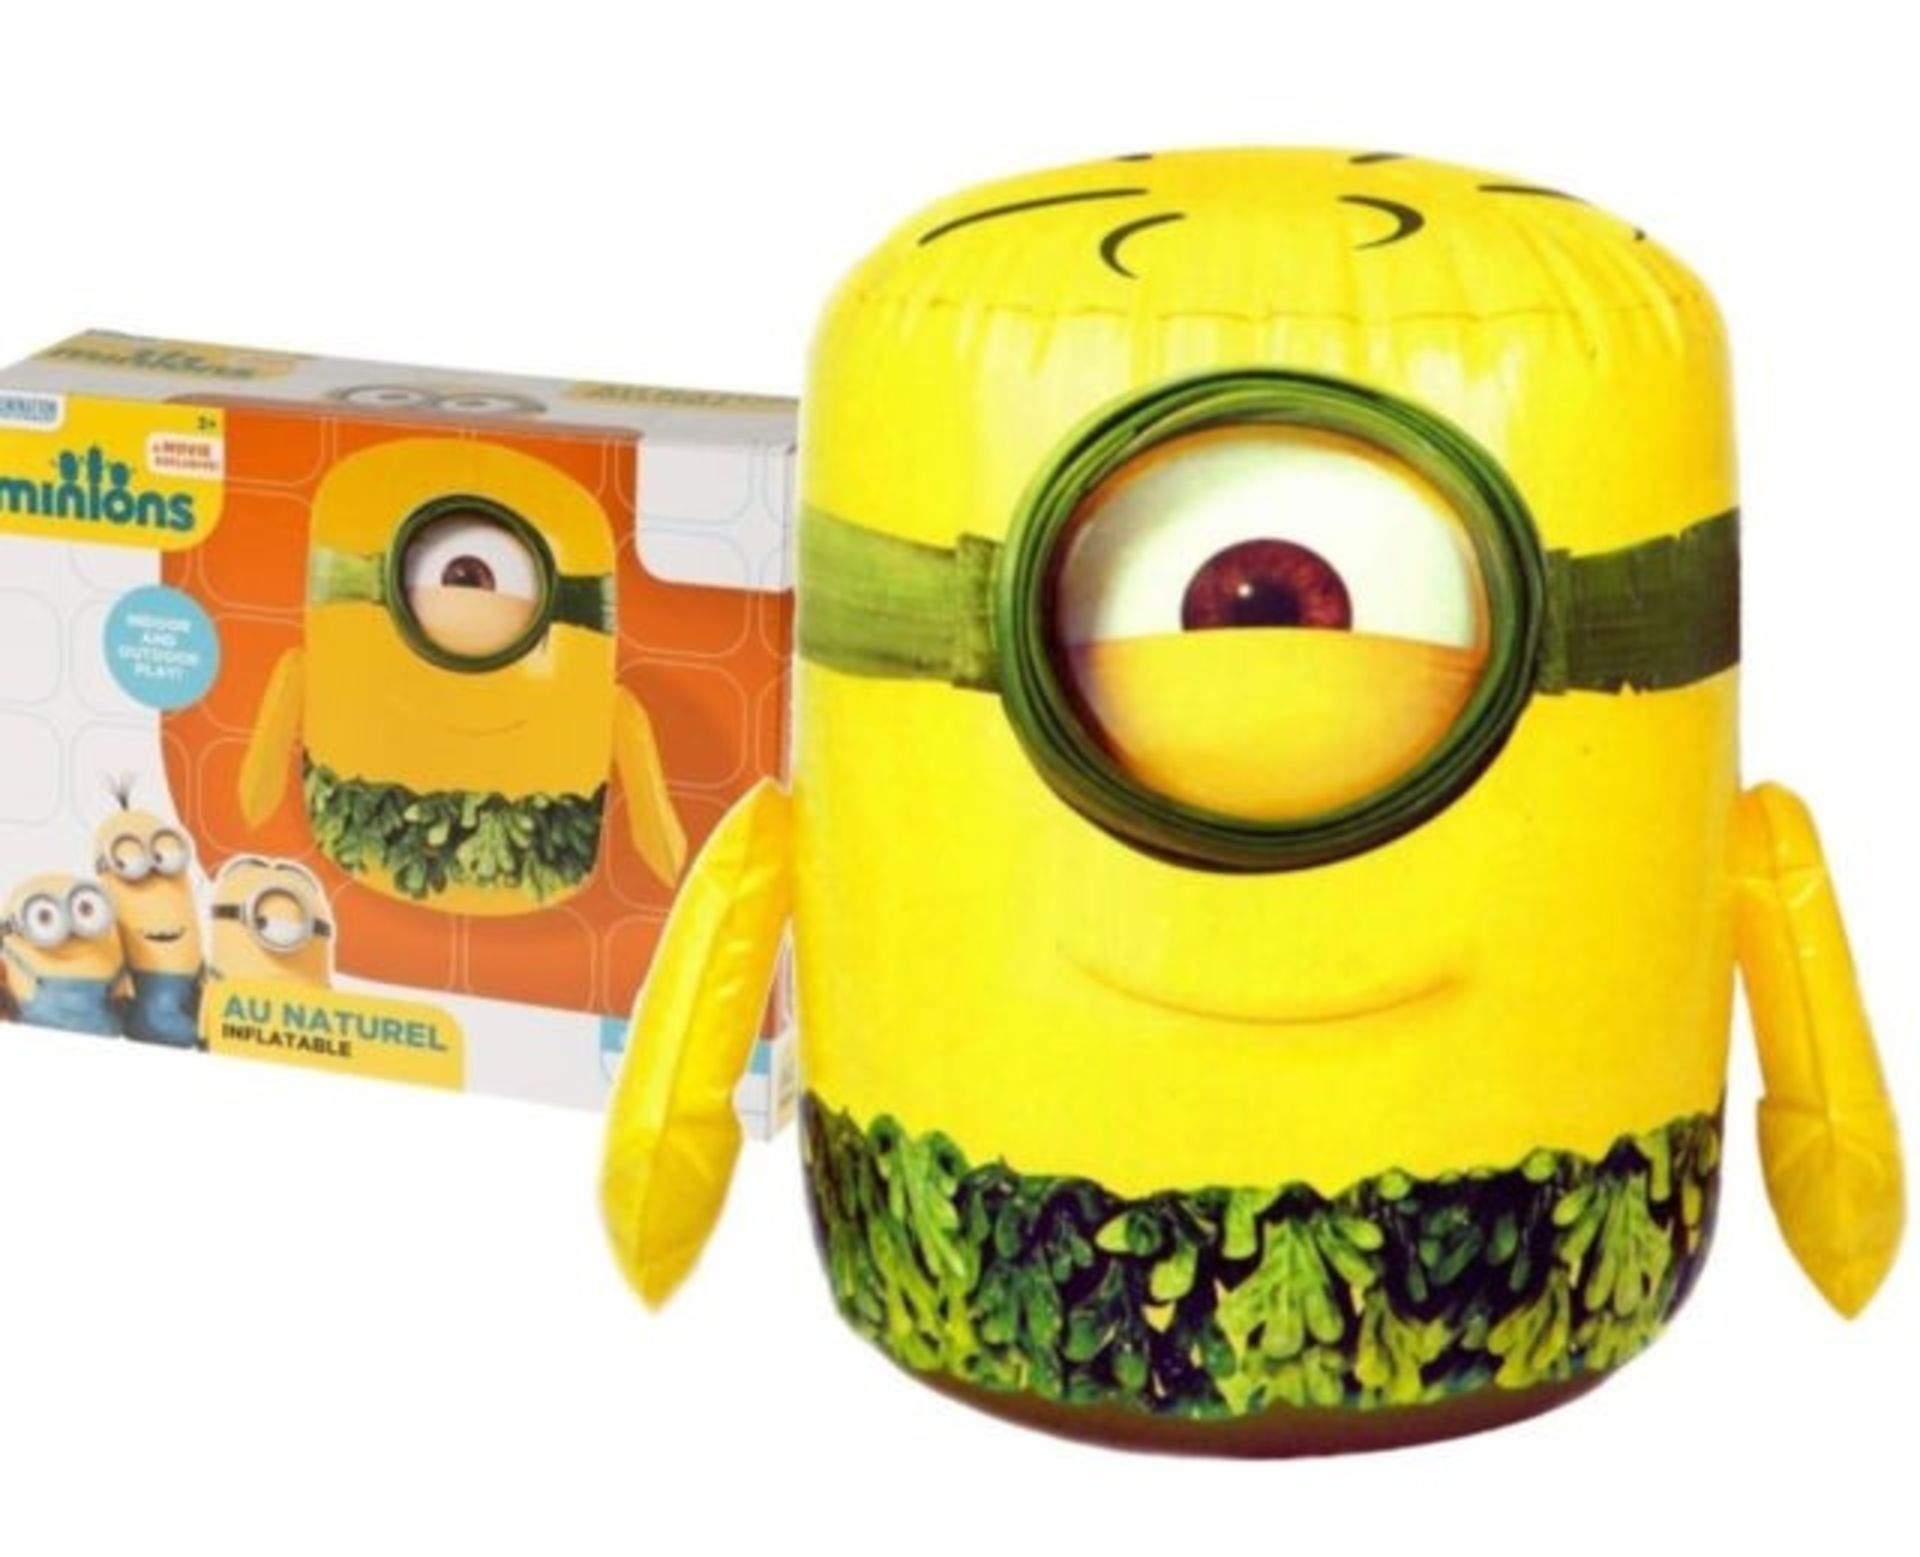 1 BRAND NEW BOXED MINIONS AU NATUREL INFLATABLE BOP BAG / RRP £7.99 (VIEWING HIGHLY RECOMMENDED)